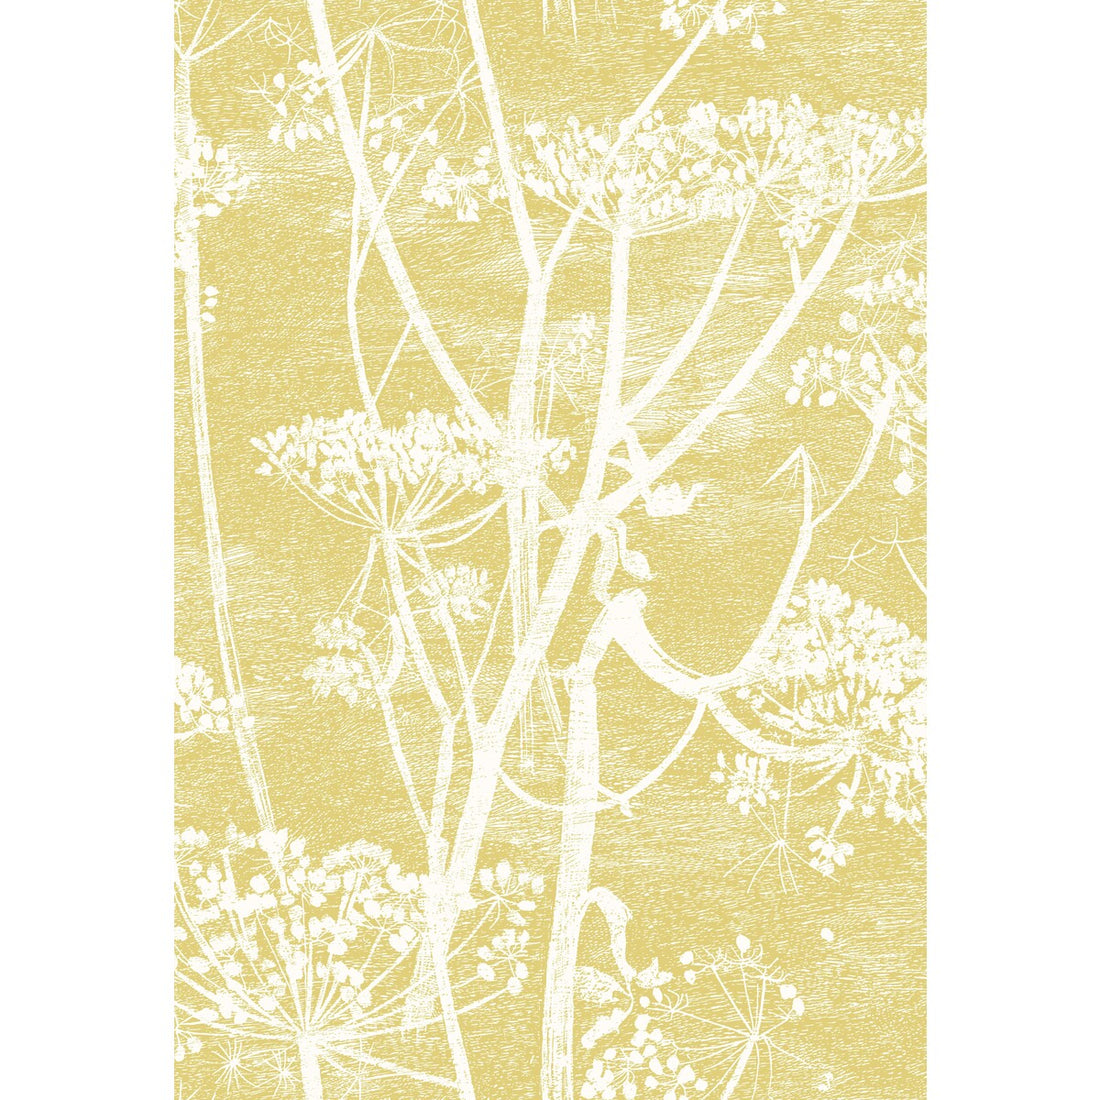 Cow Parsley fabric in wht &amp; chartre color - pattern F111/5020.CS.0 - by Cole &amp; Son in the Cole &amp; Son Contemporary Fabrics collection